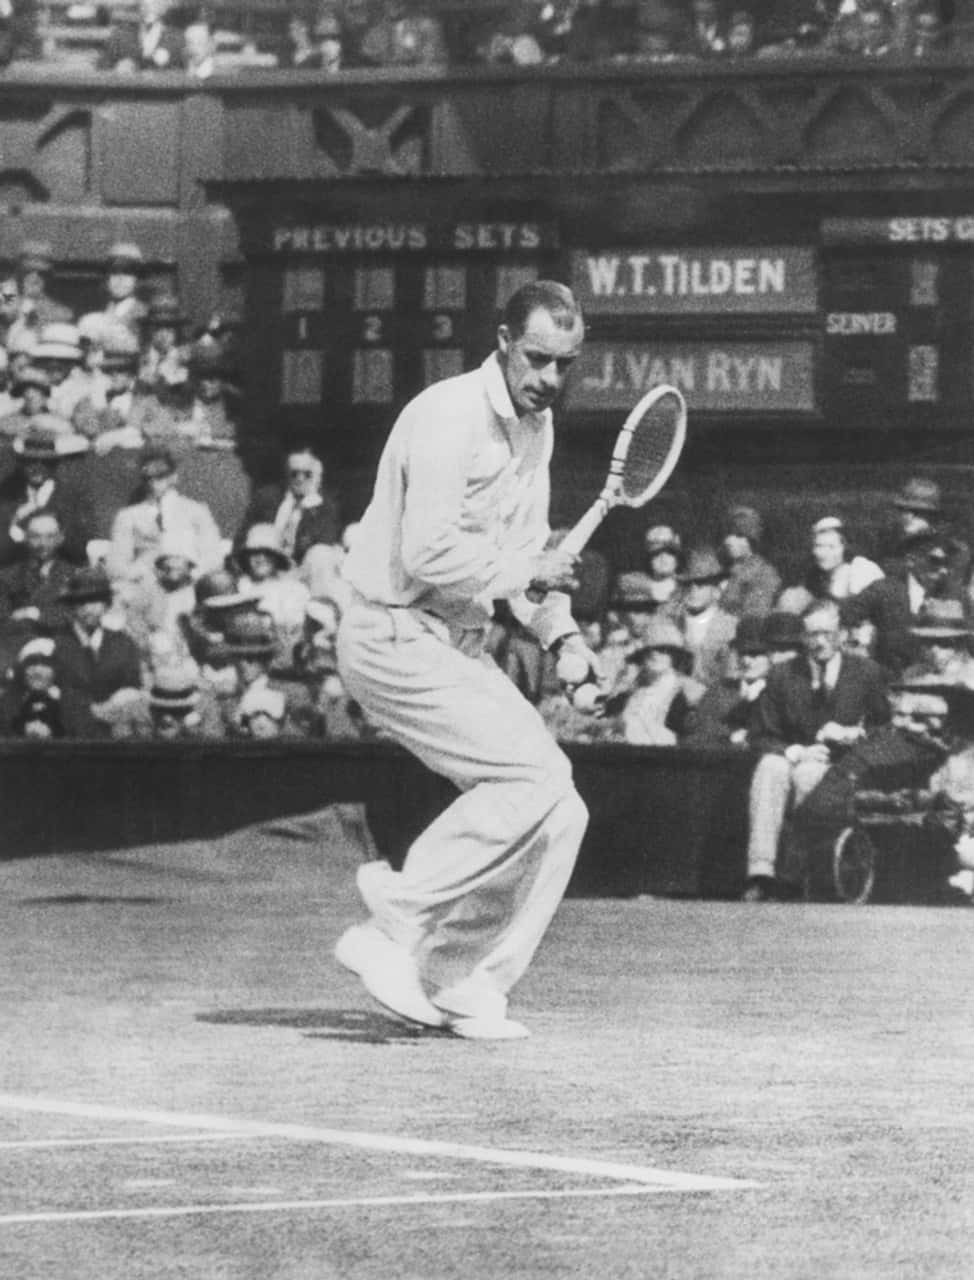 Donbudge Tennis Bill Tilden Translates To Don Budge Tennis Bill Tilden In Swedish, As They Are Proper Names And Do Not Require Translation In This Context Of Computer Or Mobile Wallpaper. Wallpaper